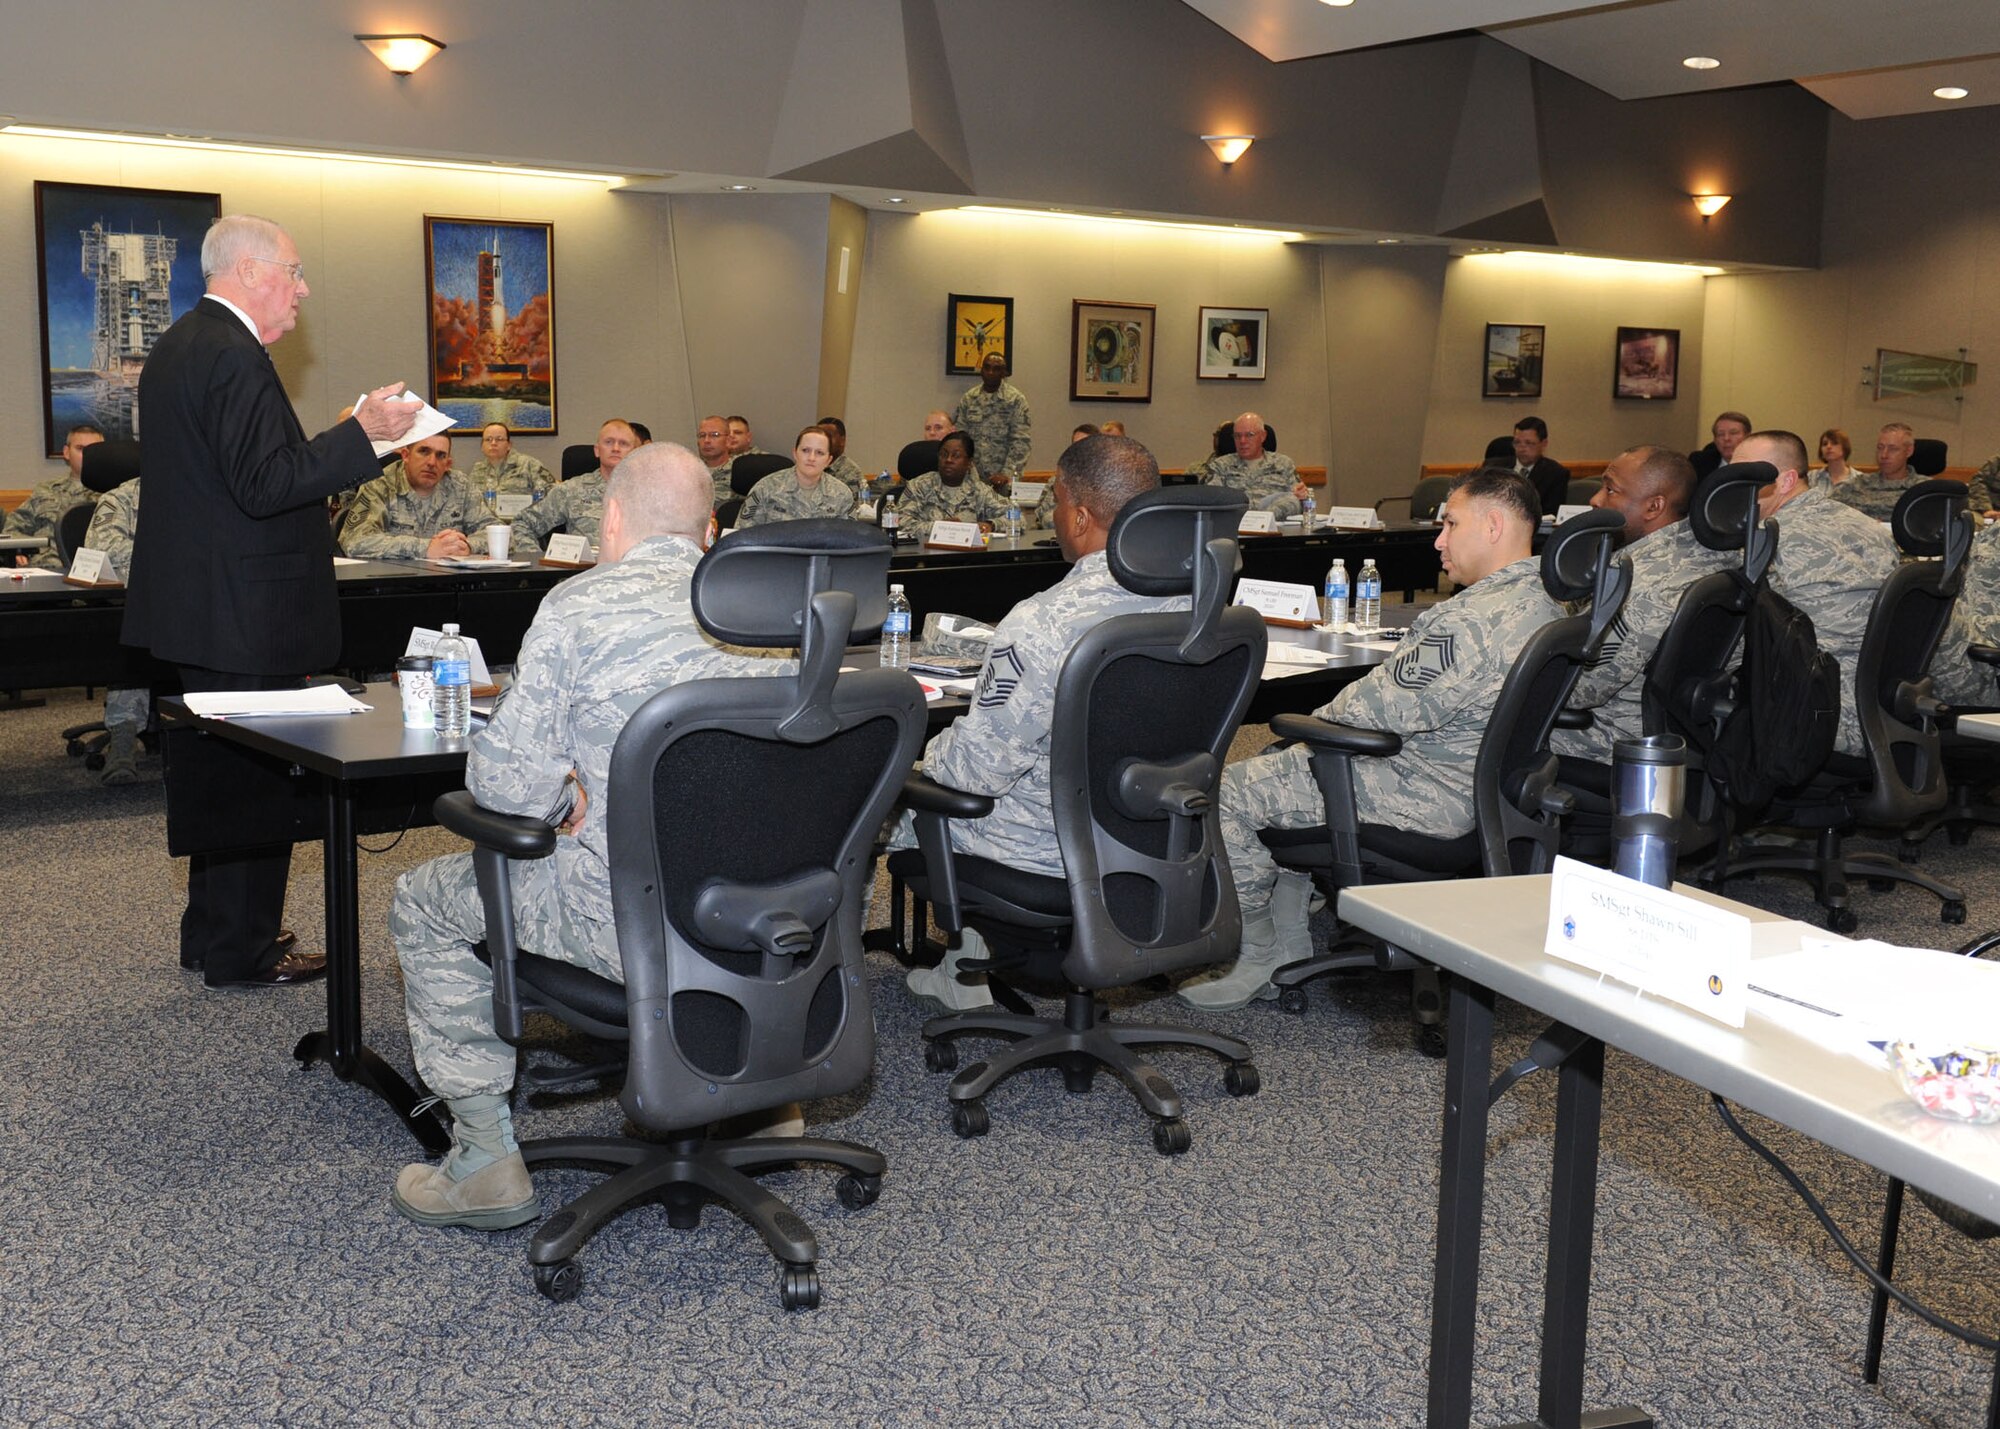 Special class mentor retired Chief Master Sgt. John “Doc” McCauslin shares an update about the Air Force Sergeants' Association at the 2013 Air Force Materiel Command Chiefs' Orientation. (U.S. Air Force photo/ Staff Sgt. Christopher Carwile)